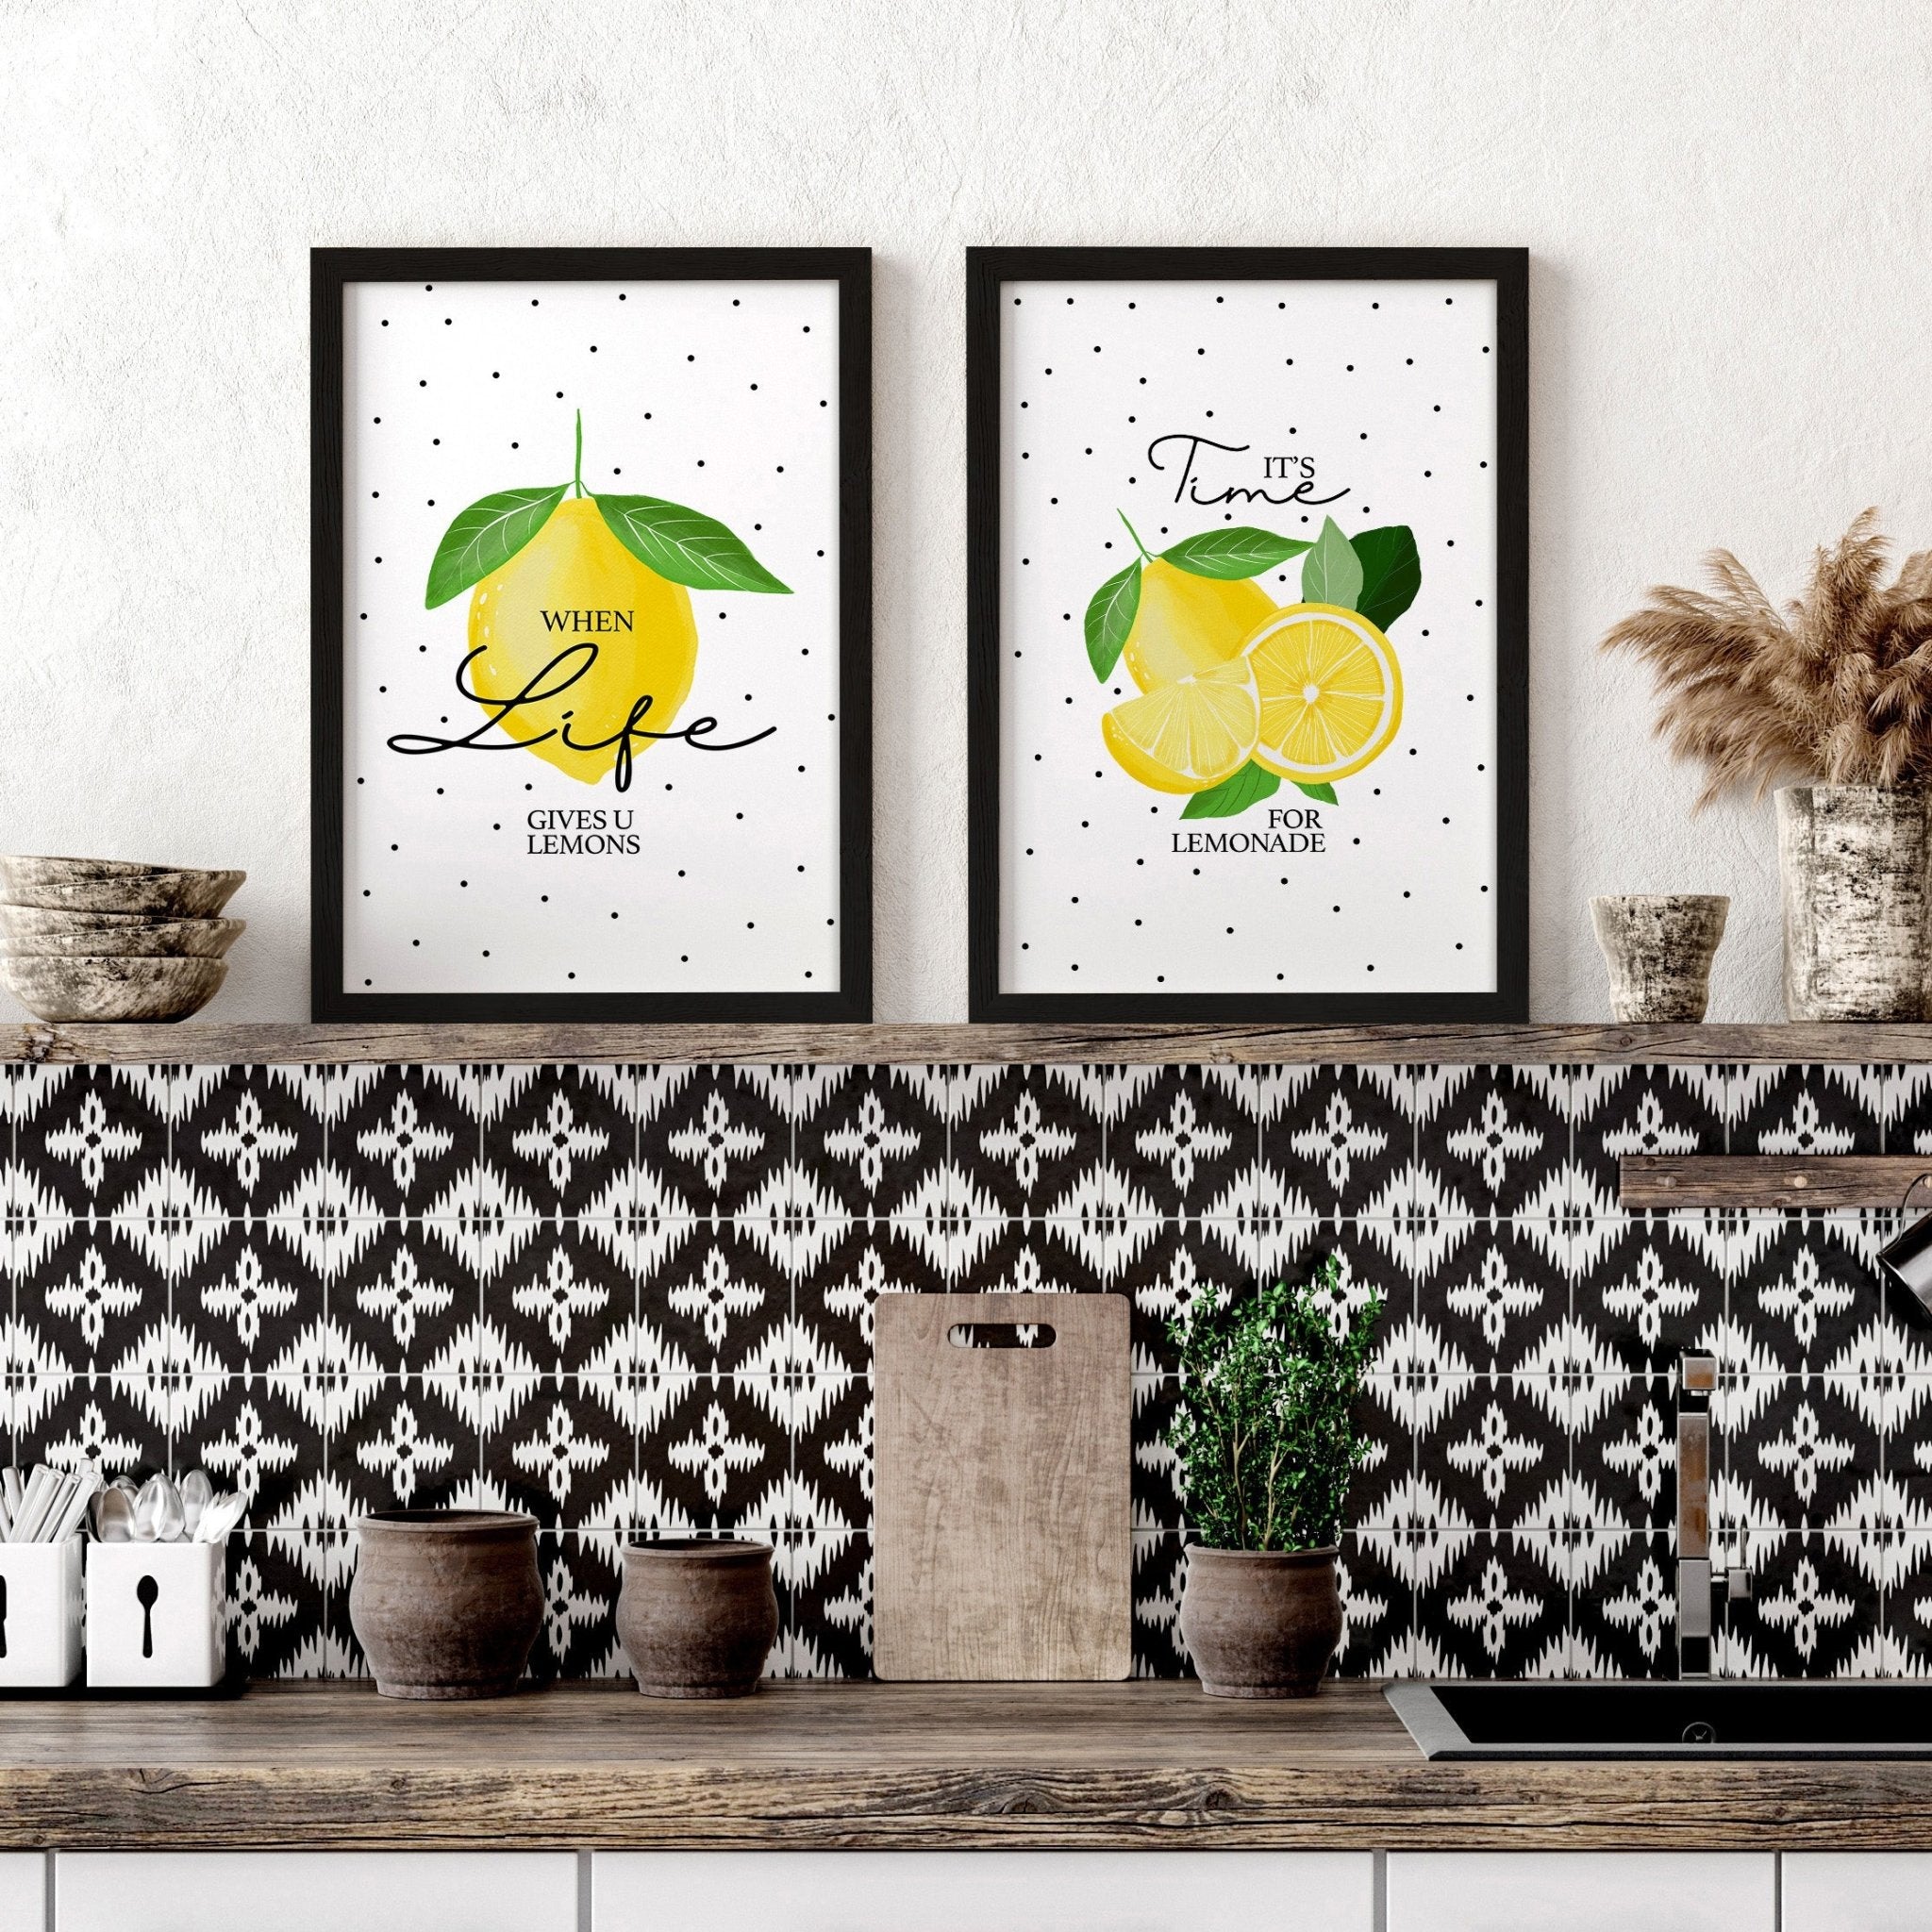 10 Creative Ideas for Adding Art to the Kitchen Walls - About Wall Art